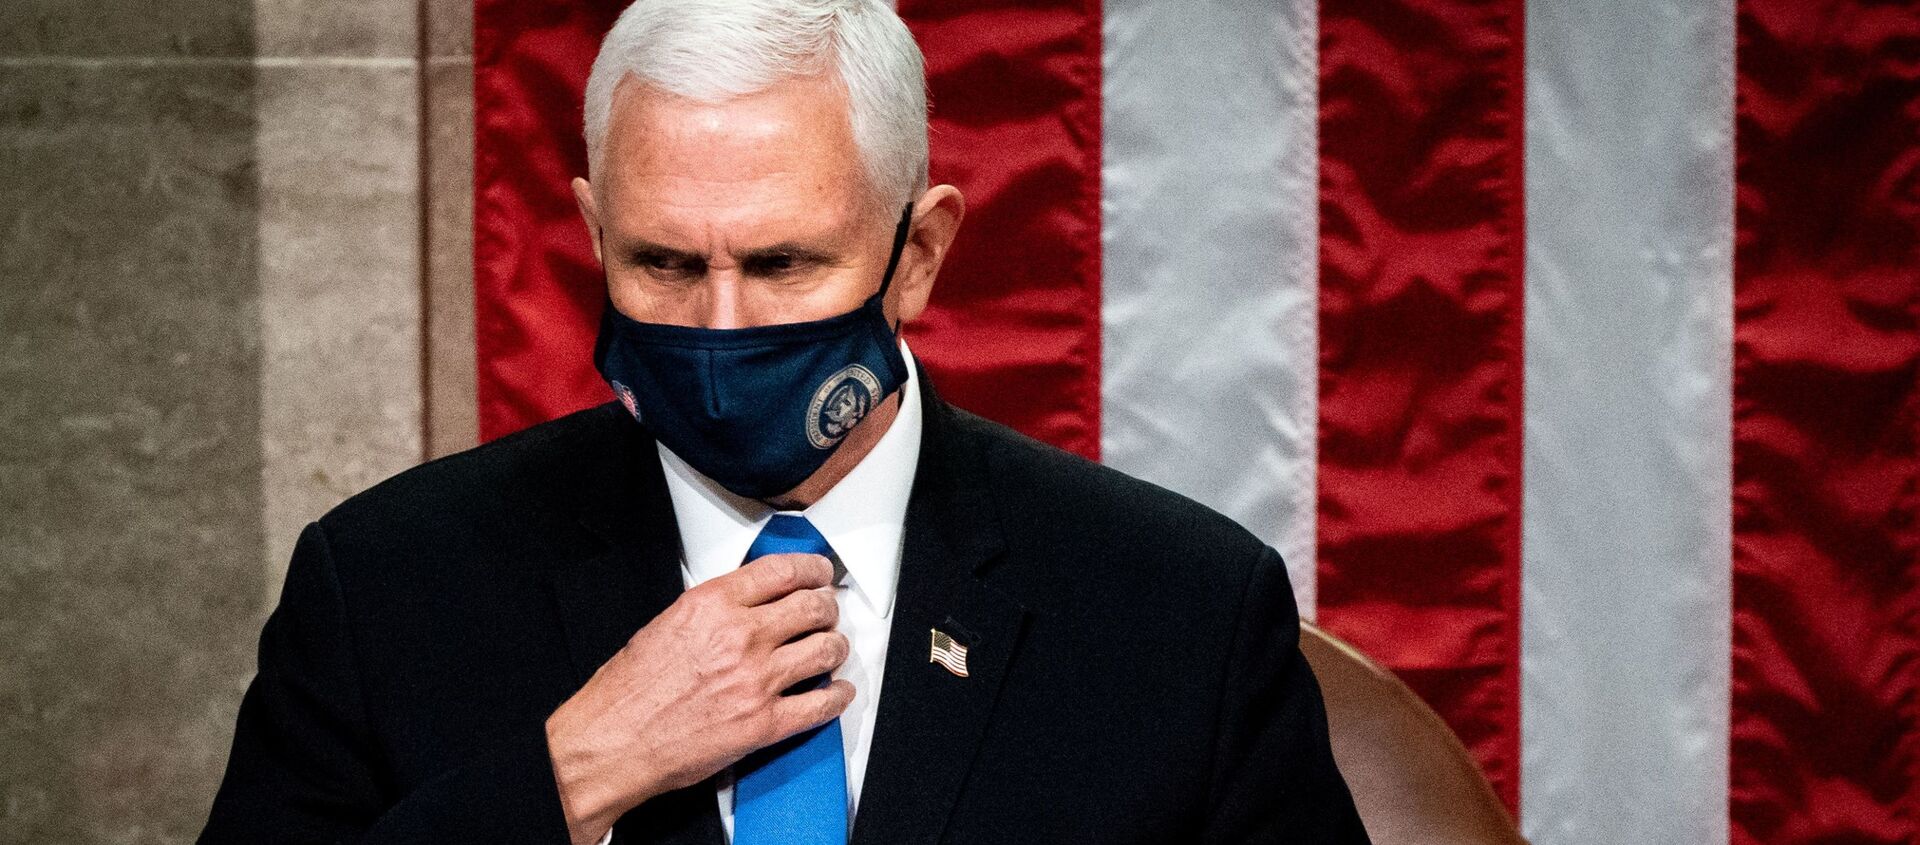 Vice President Mike Pence presides over a Joint session of Congress to certify the 2020 Electoral College results after supporters of President Donald Trump stormed the Capitol earlier in the day, on Capitol Hill in Washington, U.S. January 6, 2021. - Sputnik International, 1920, 10.01.2021